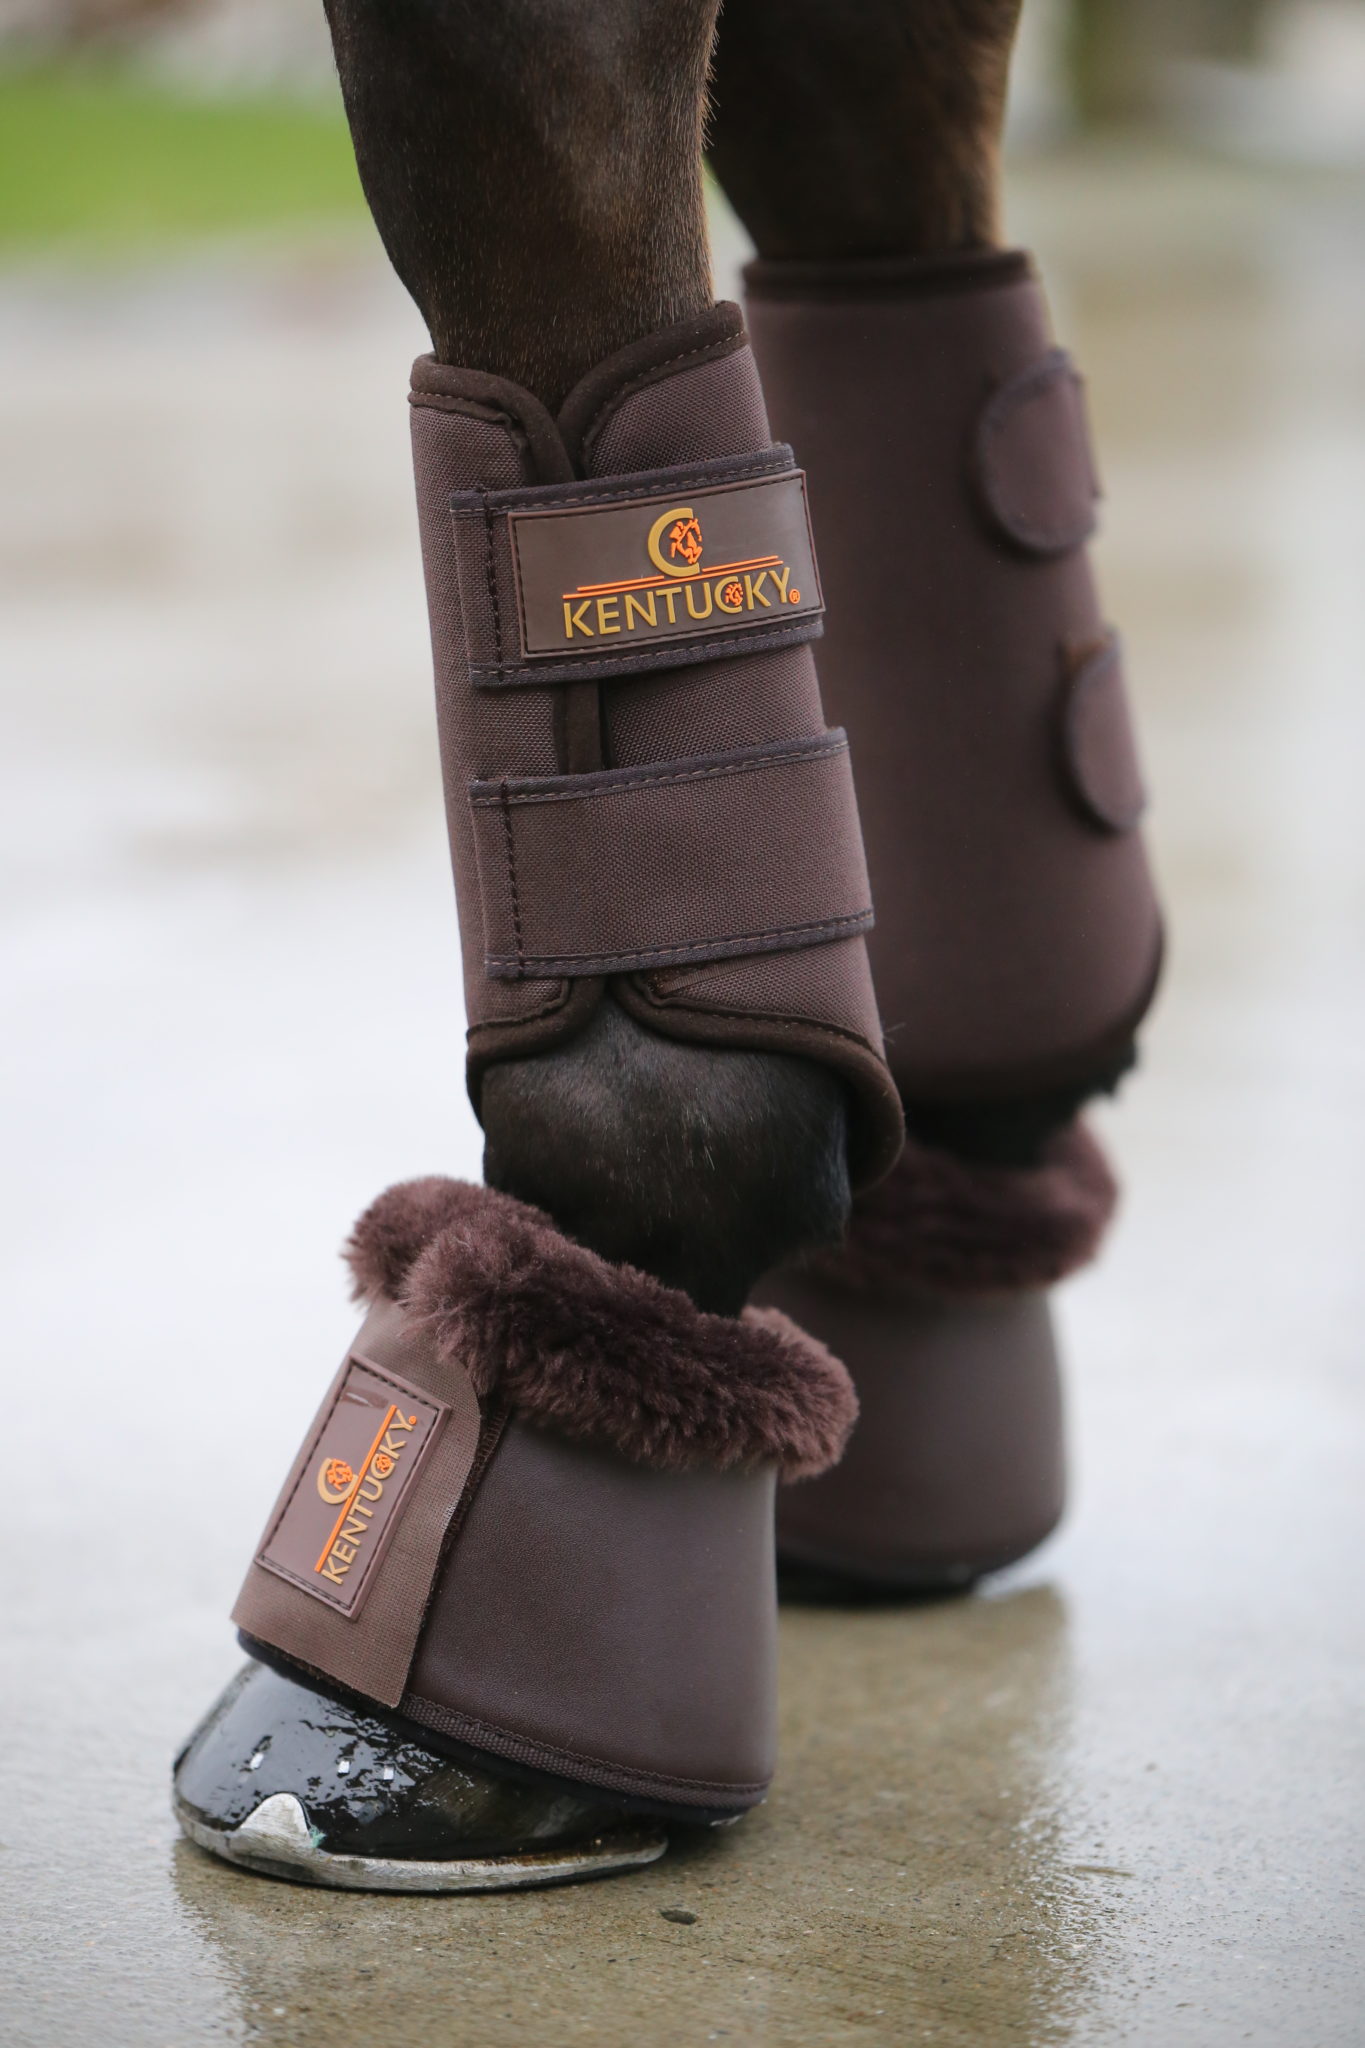 Kentucky Turnout Boots 3D Spacer - Spicehorse